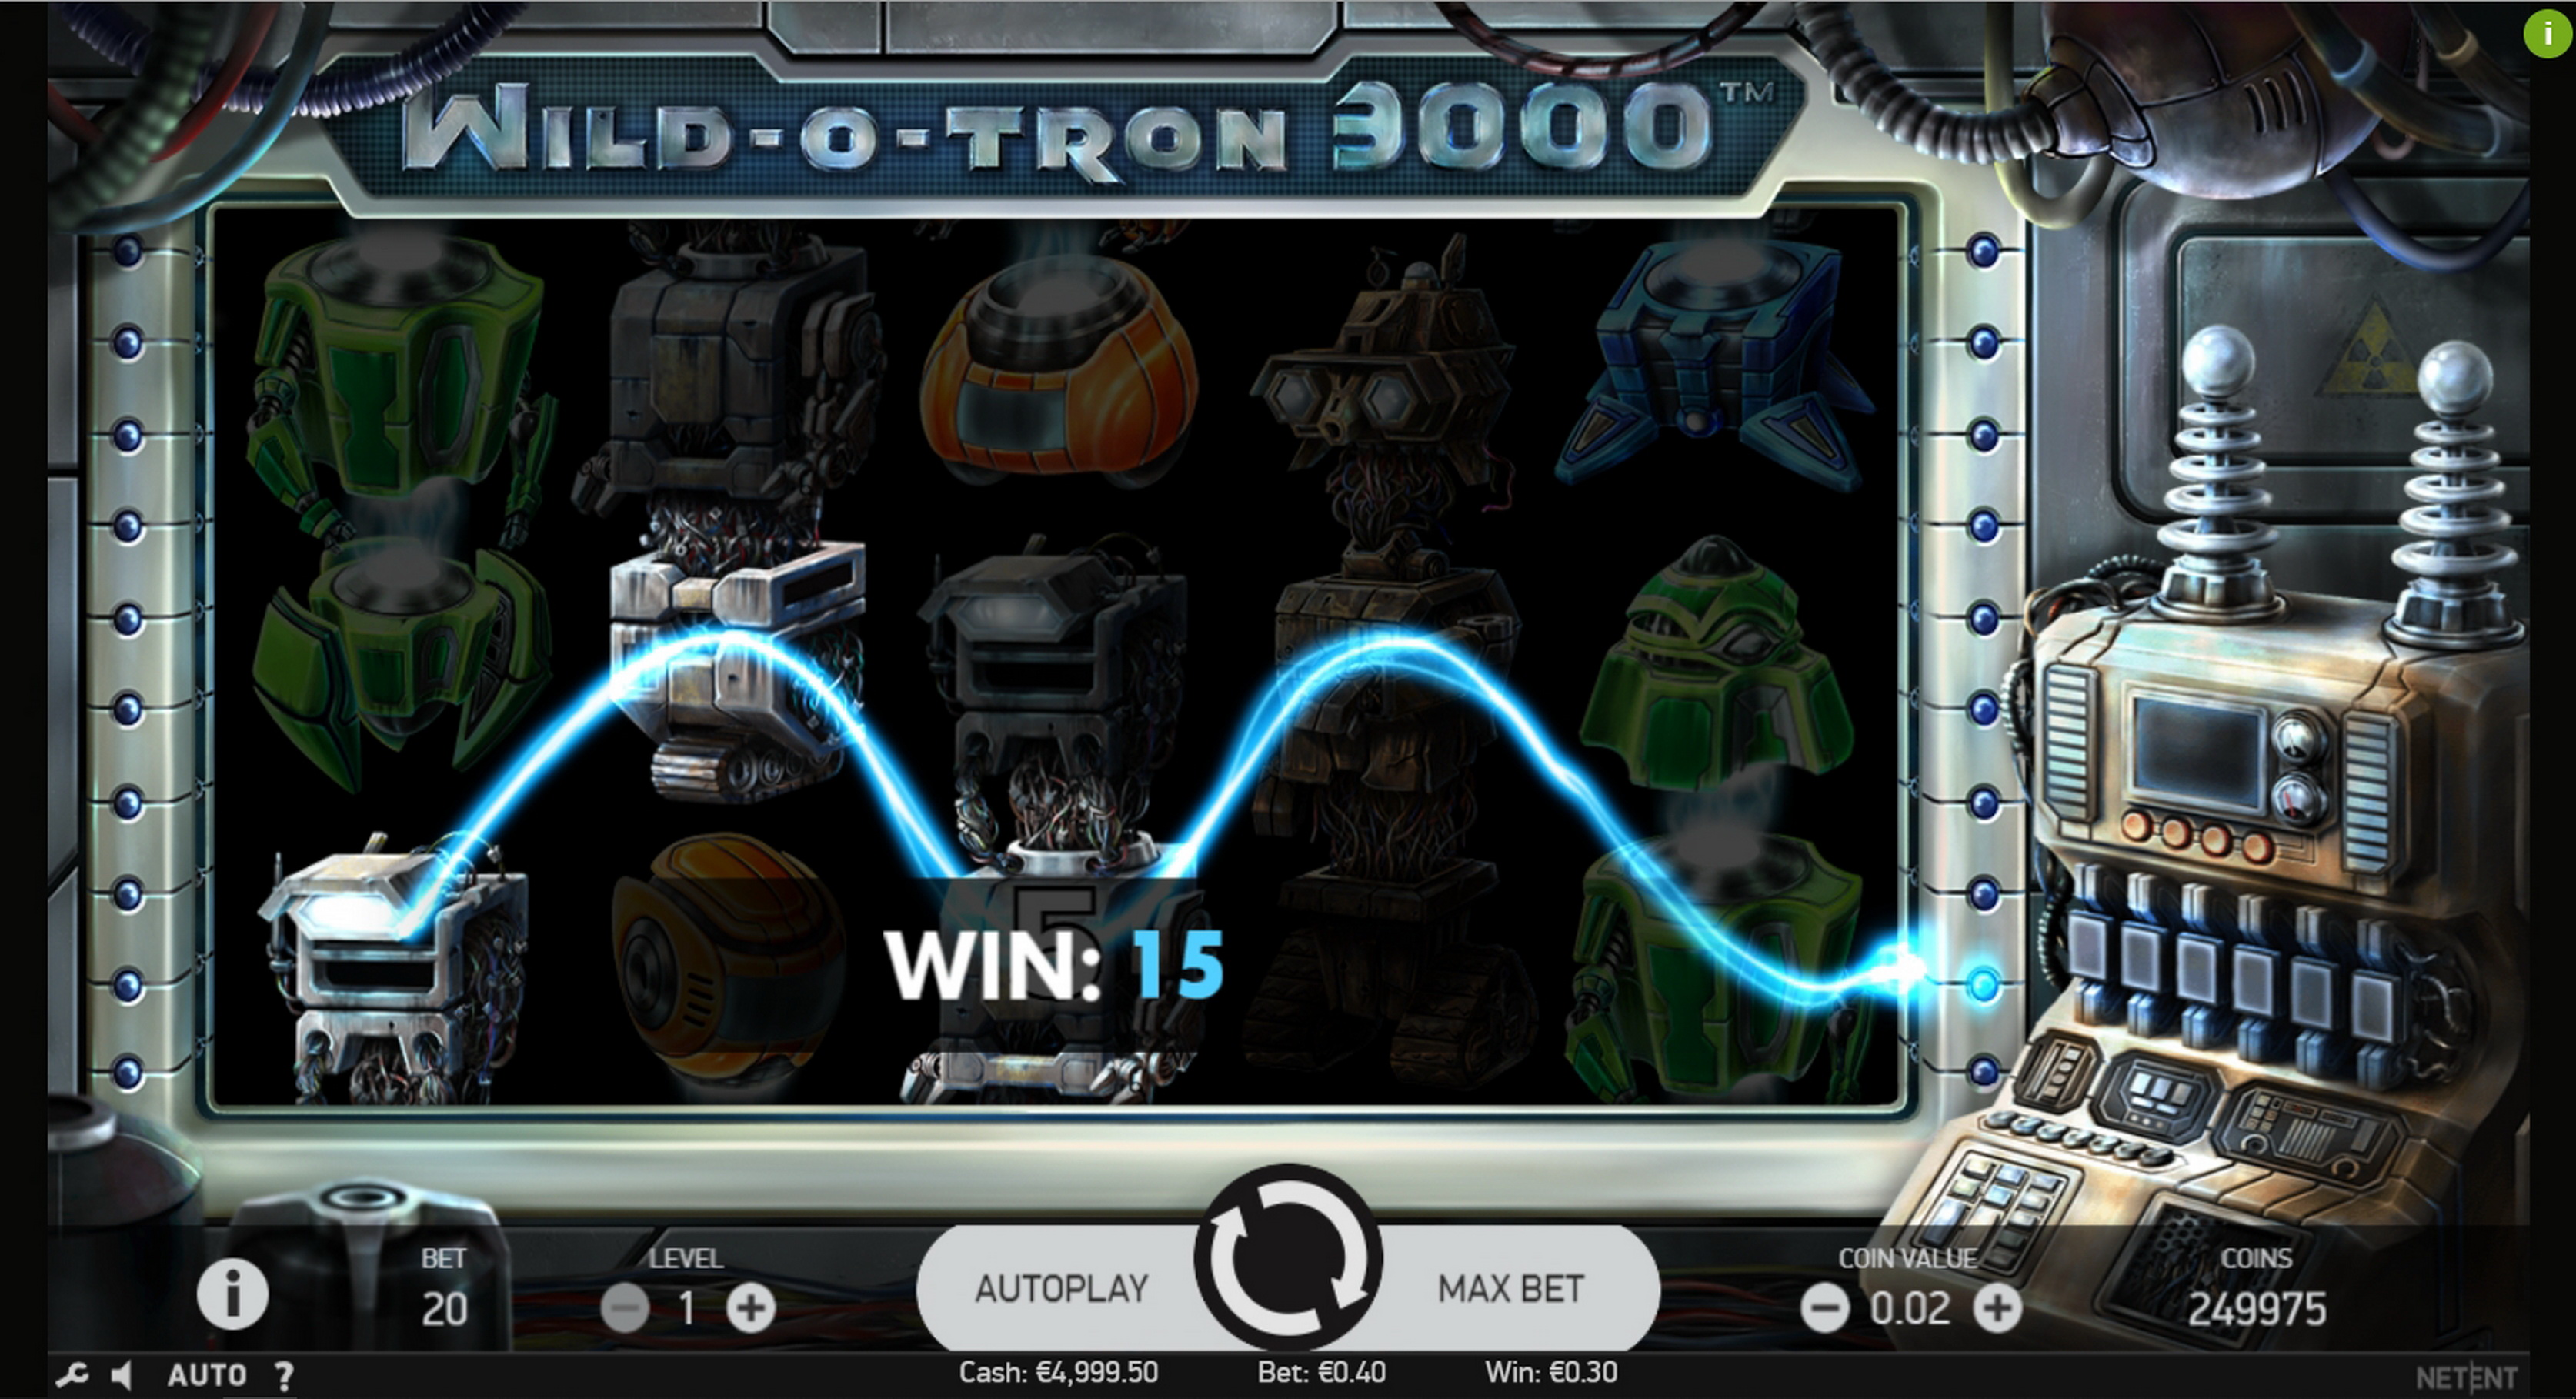 Win Money in Wild-O-Tron 3000 Free Slot Game by NetEnt